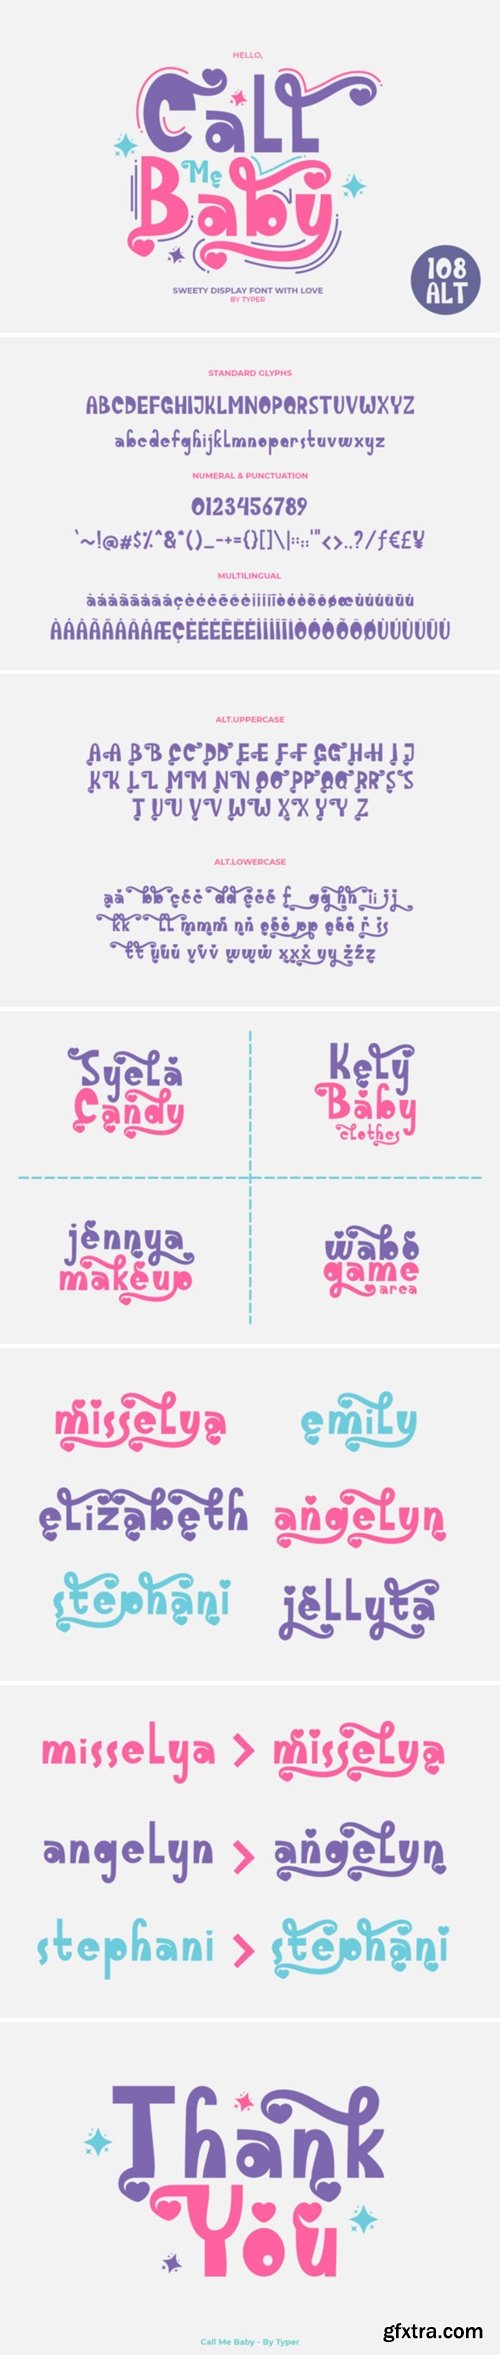 Call Me Baby Font